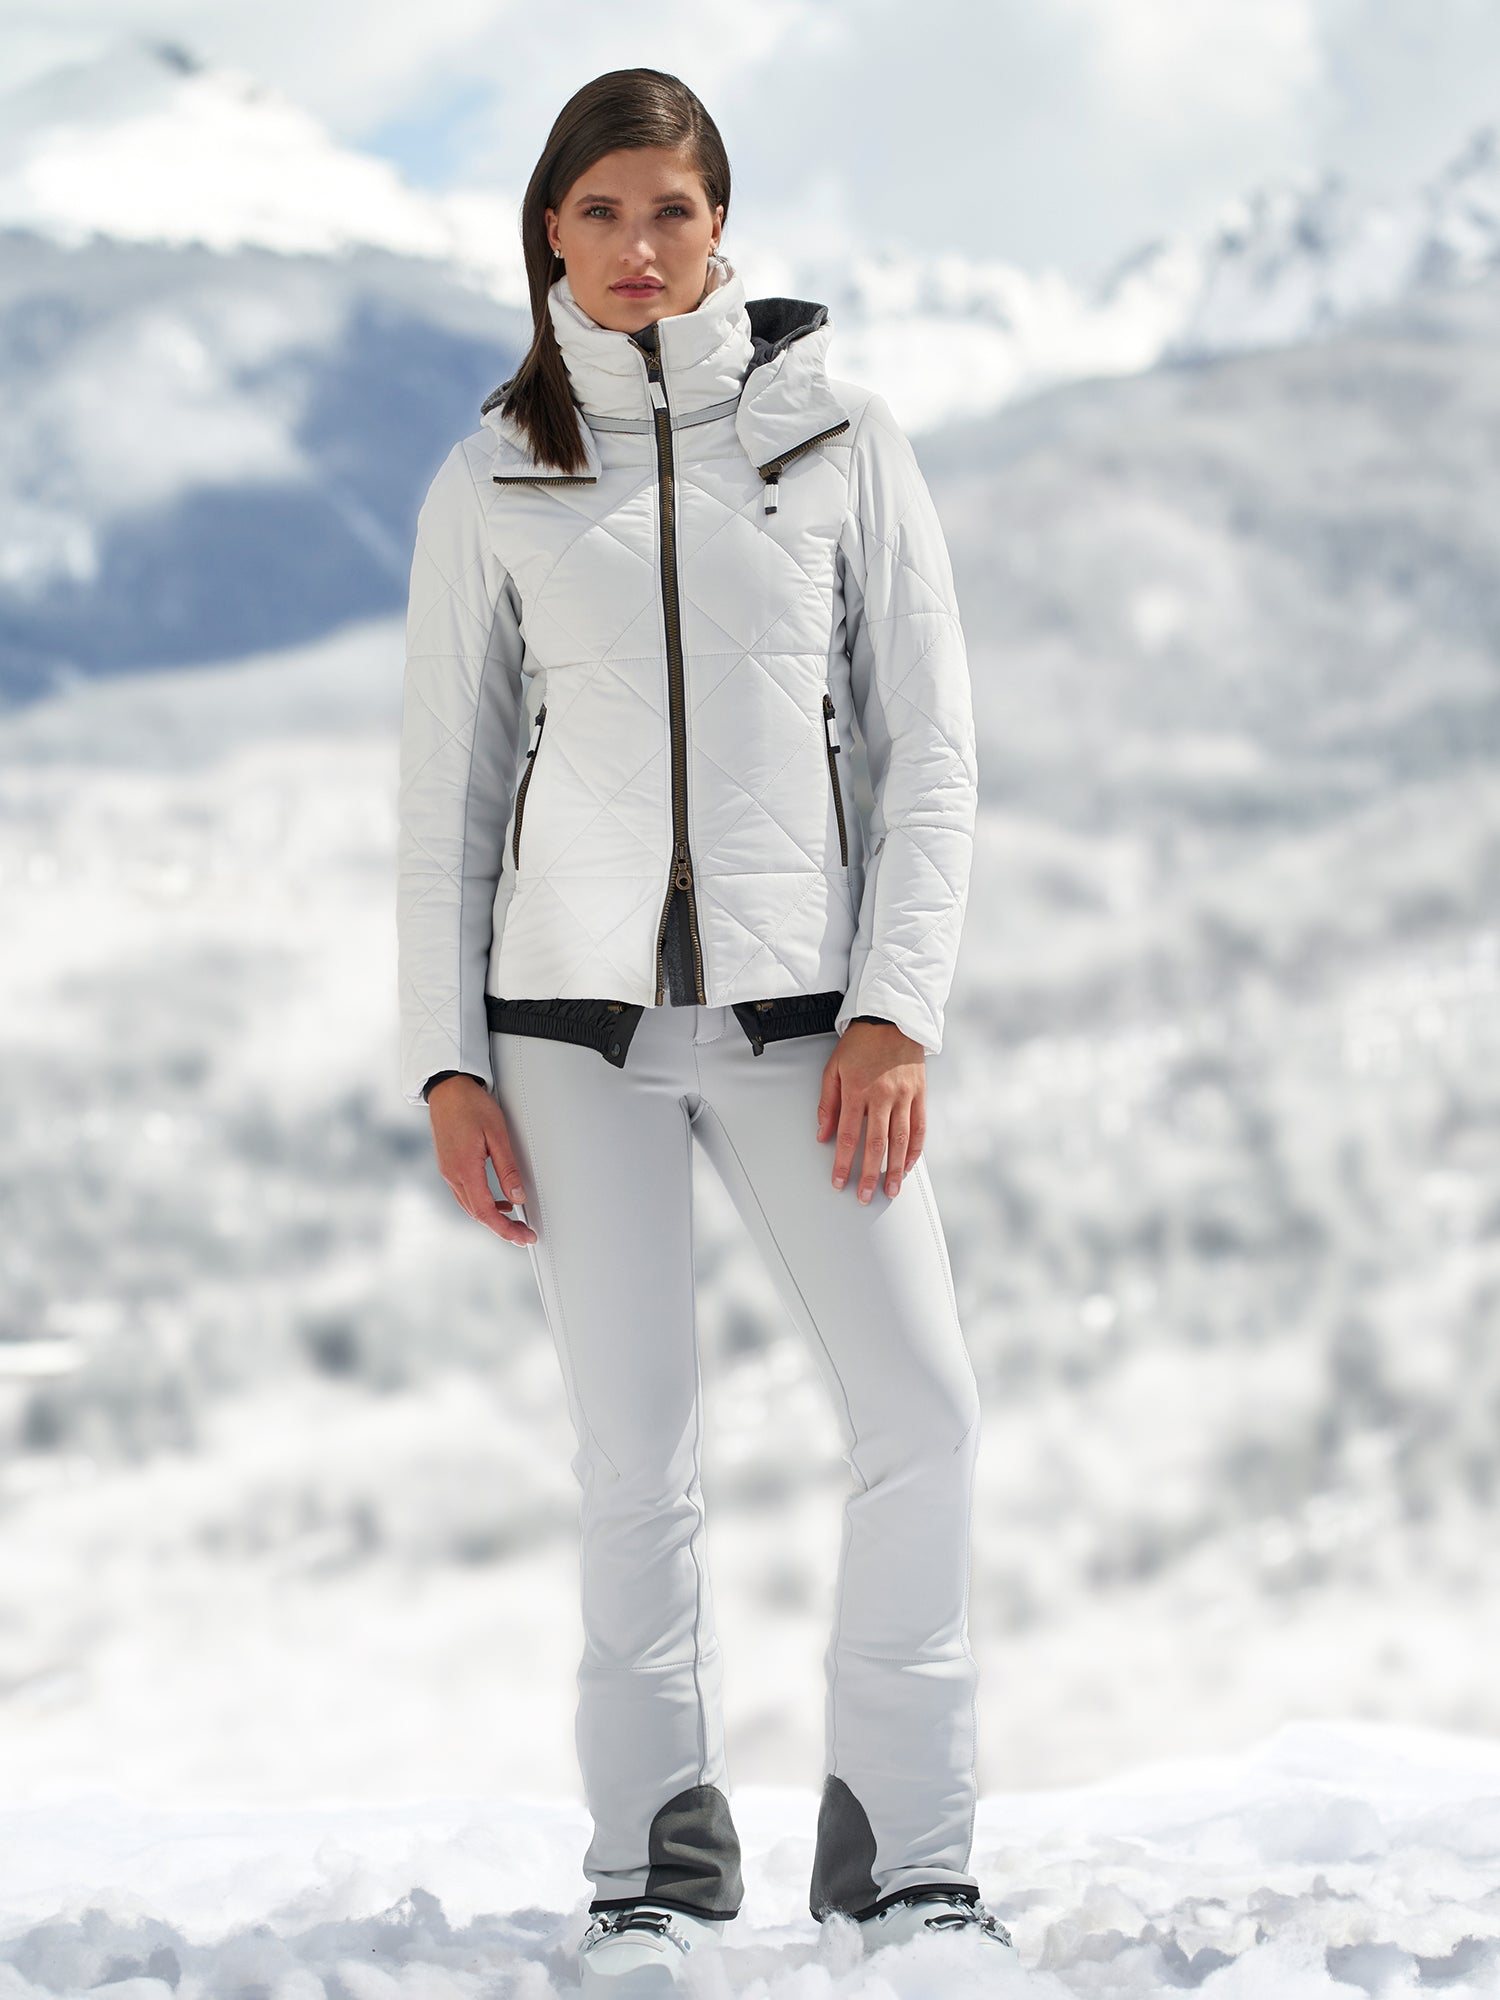 womens ski suits - Gorsuch  Skiing outfit, Womens ski outfits